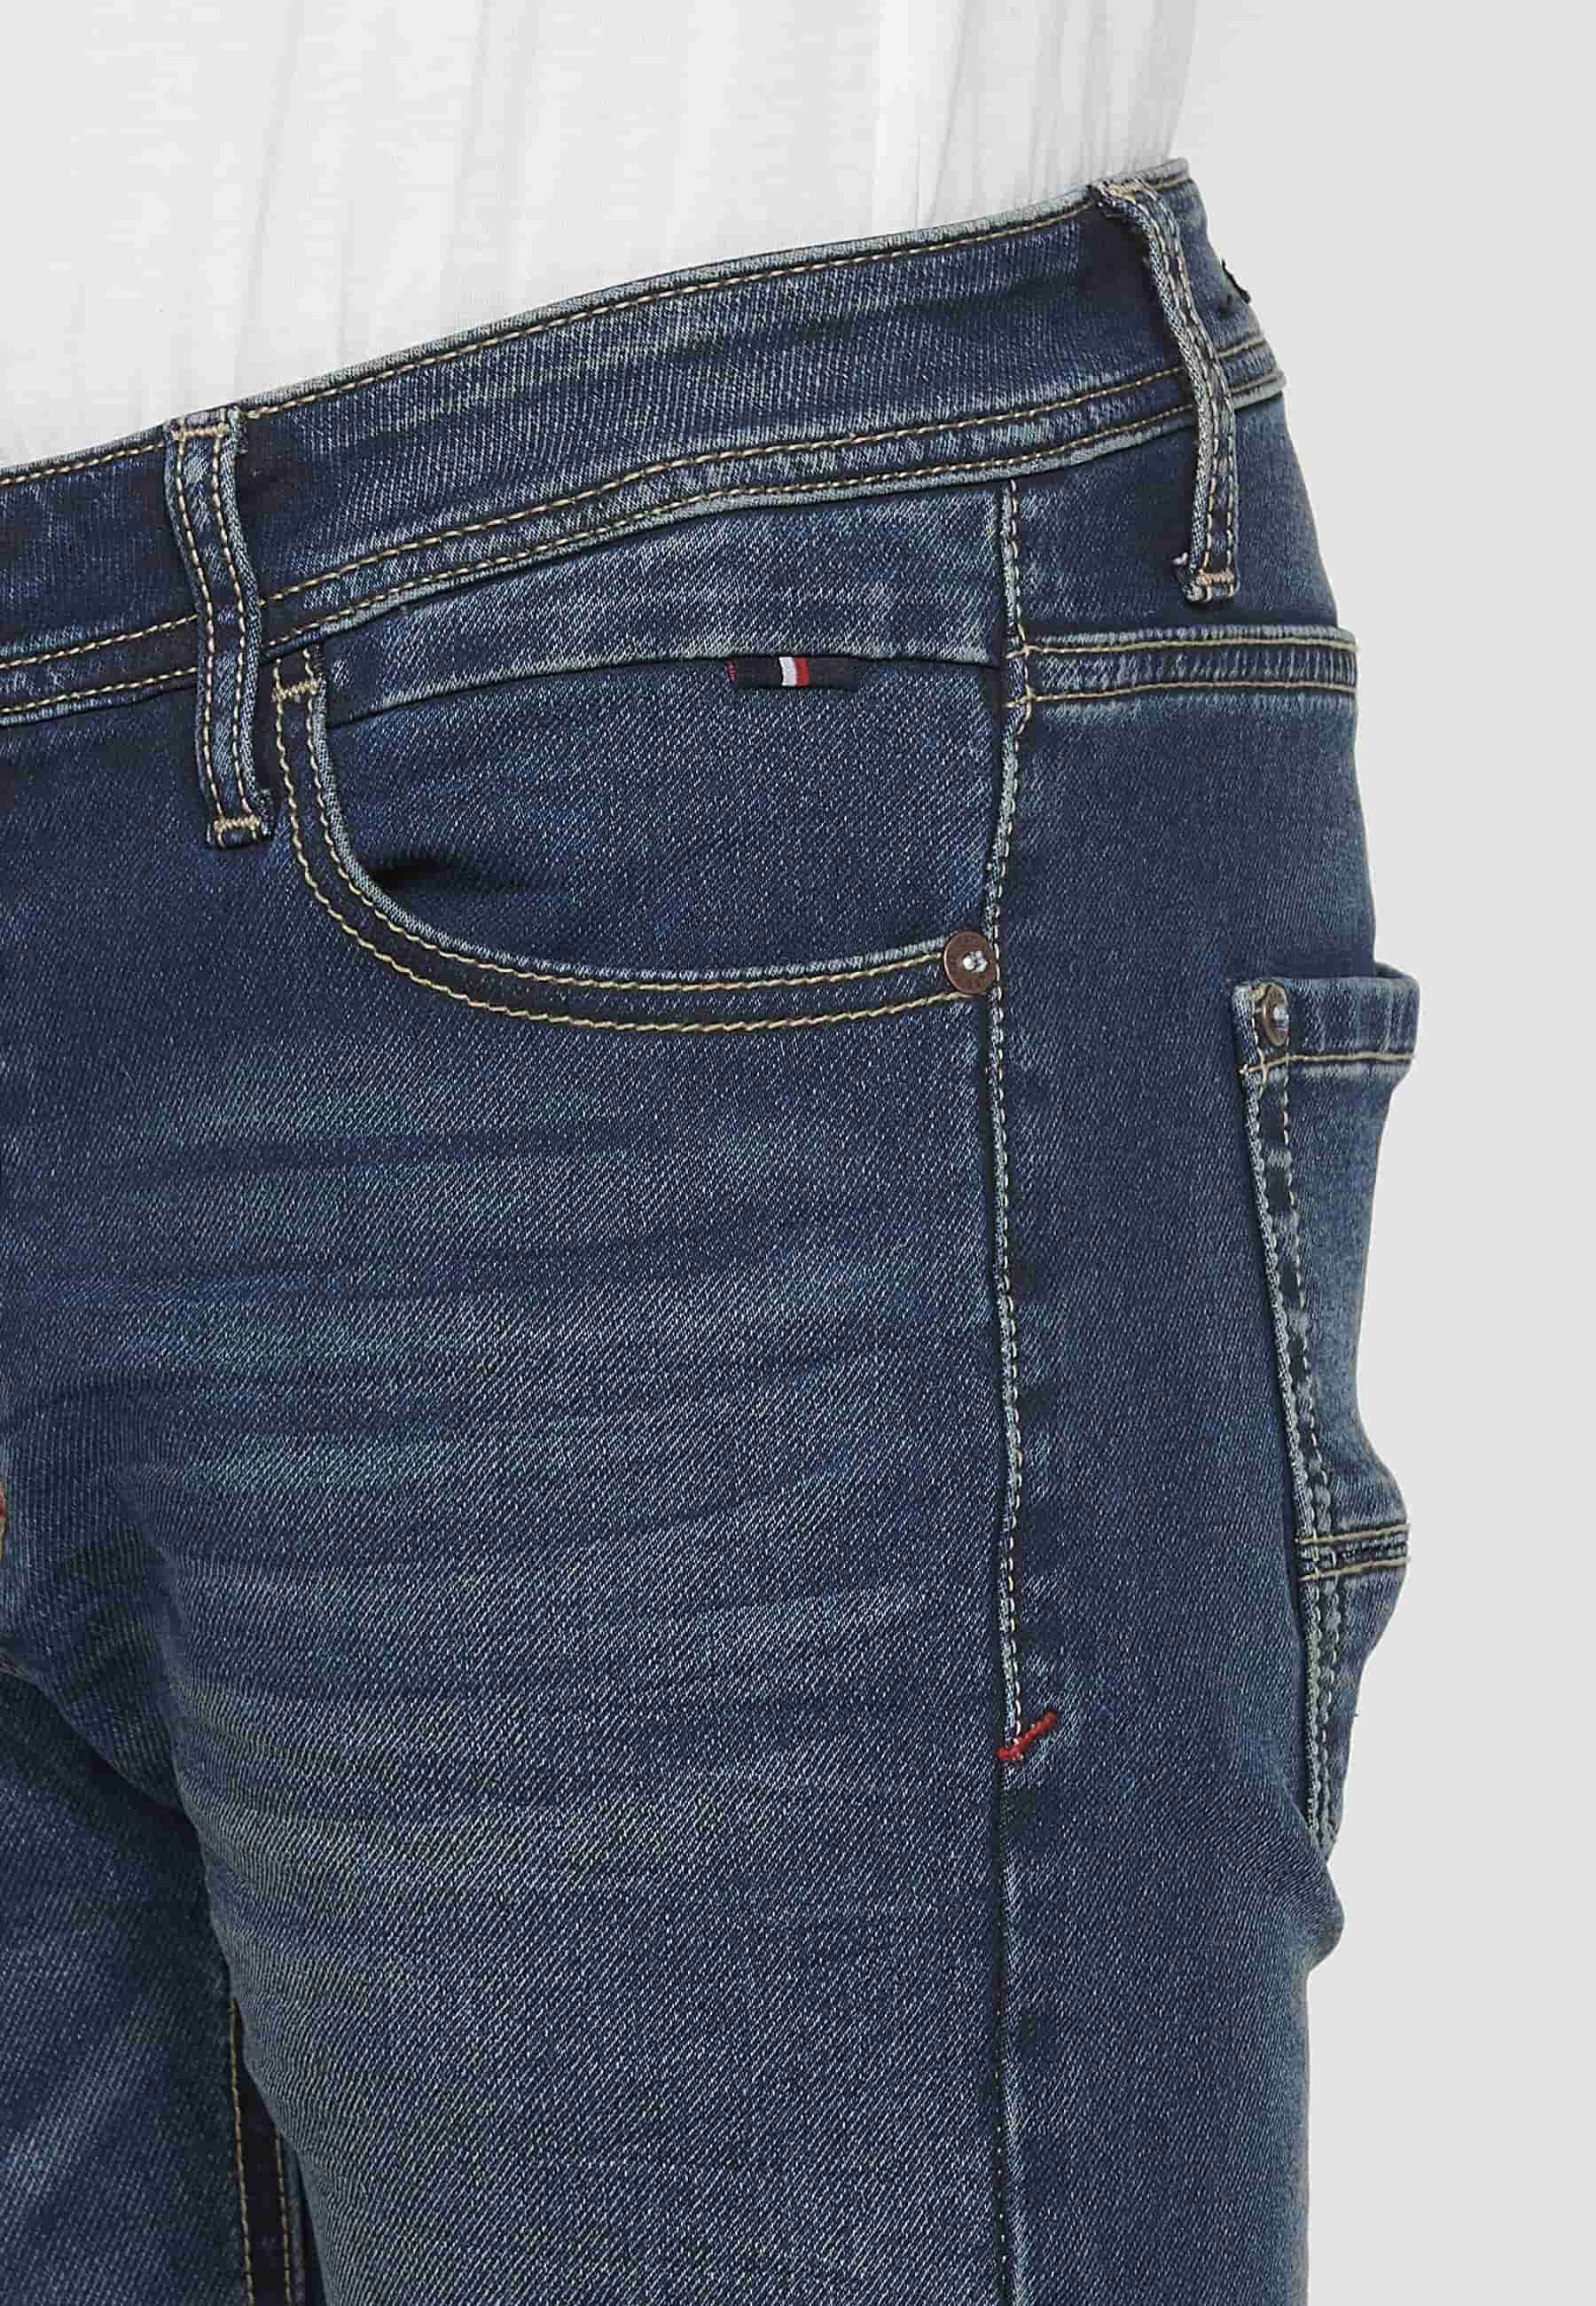 Slim fit long jeans with front zipper and button closure with five pockets, one blue pocket pocket for Men 9